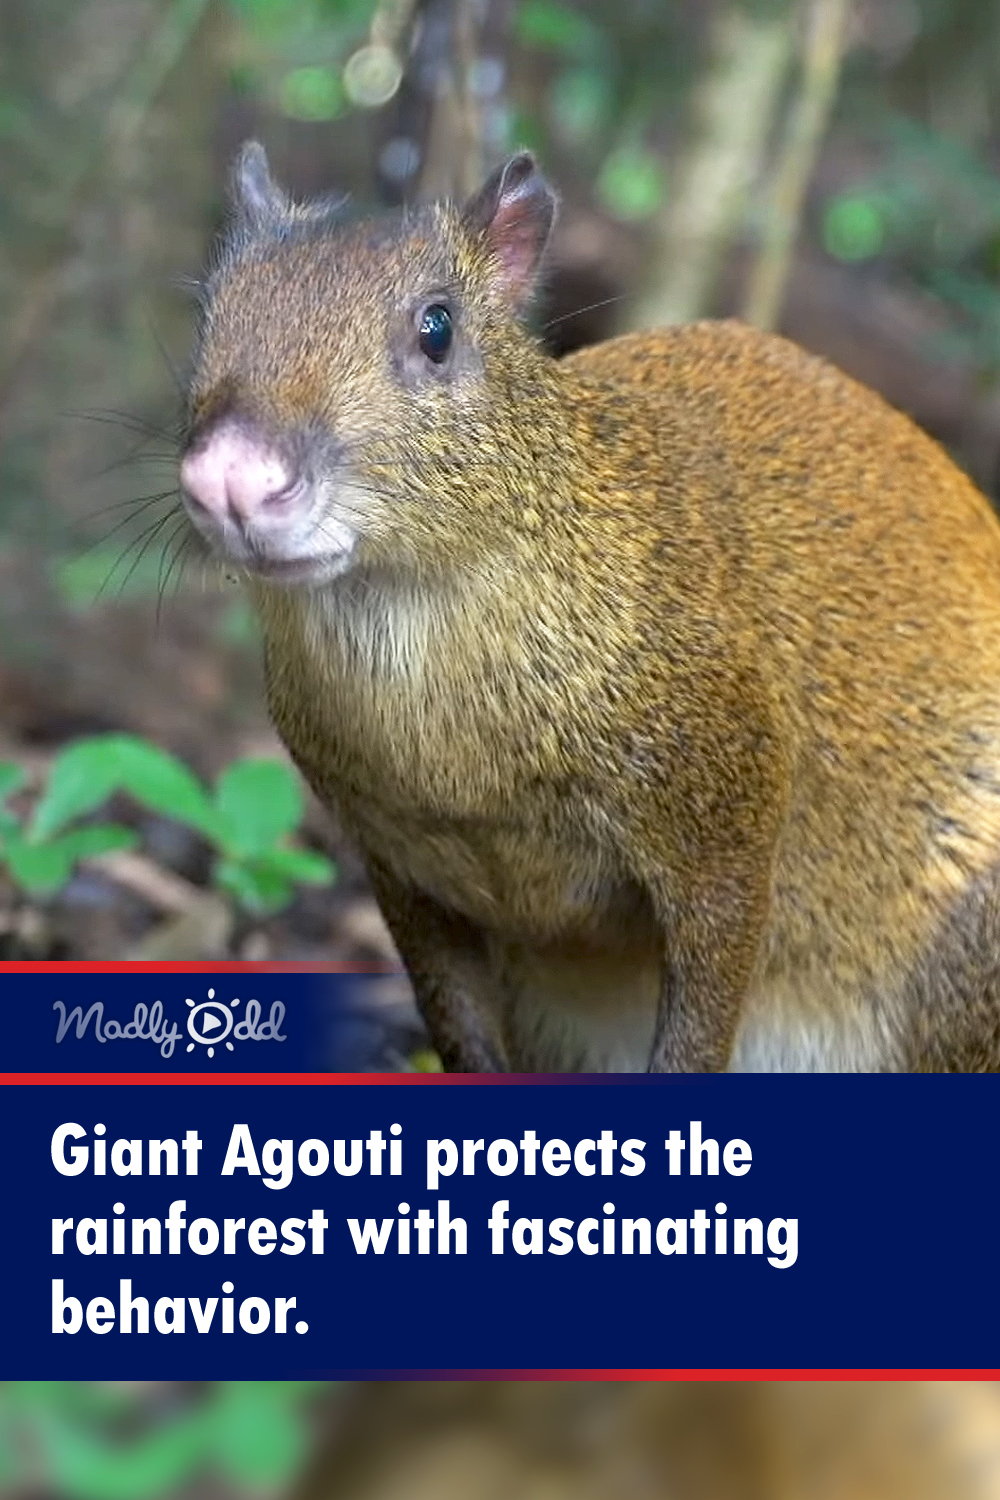 Giant Agouti protects the rainforest with fascinating behavior